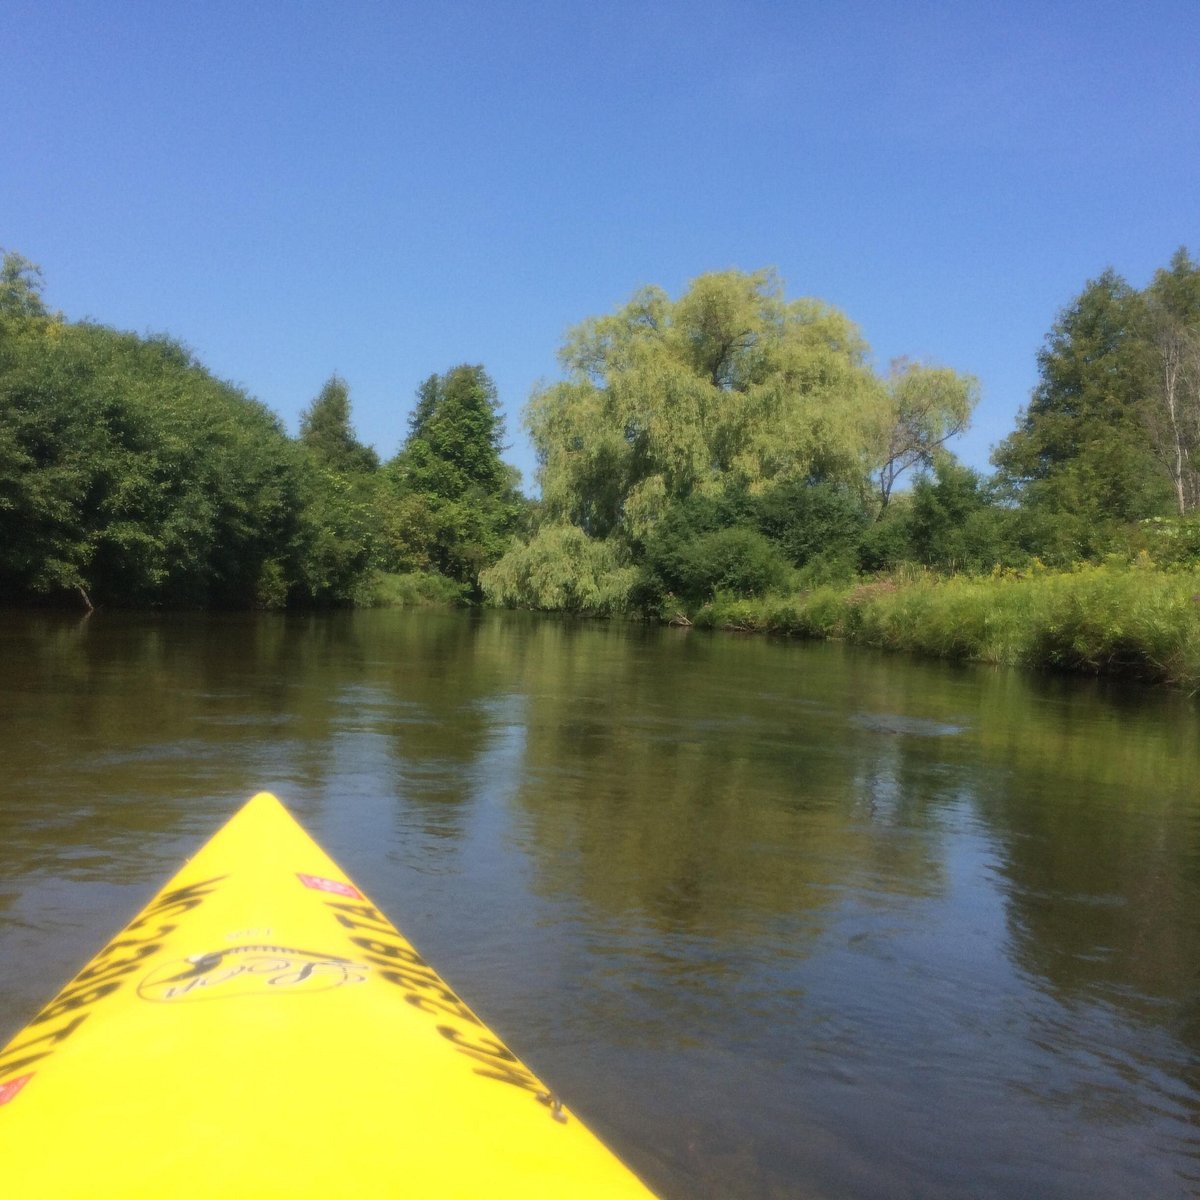 Fishing, kayaking and paddleboarding: Here's how to safely use the Jordan  River